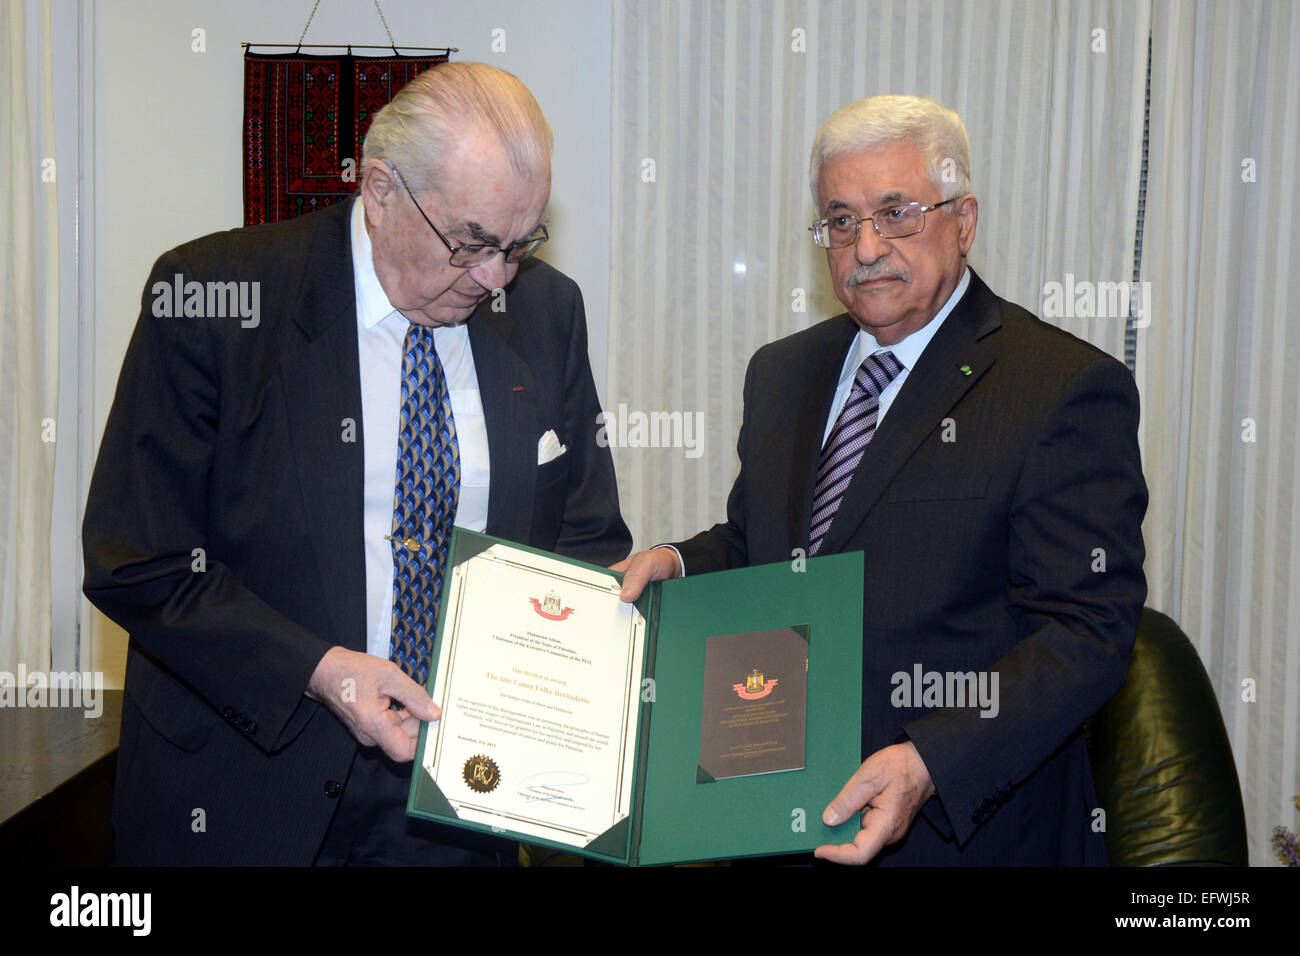 Stockholm, Stockholm, Sweden. 10th Feb, 2015. Palestinian President Mahmoud Abbas gives the late Count Folke Bernadotte, sam of the Order of Merit and the Golden excellence, in Stockholm February 10, 2015 © Thaer Ganaim/APA Images/ZUMA Wire/Alamy Live News Stock Photo